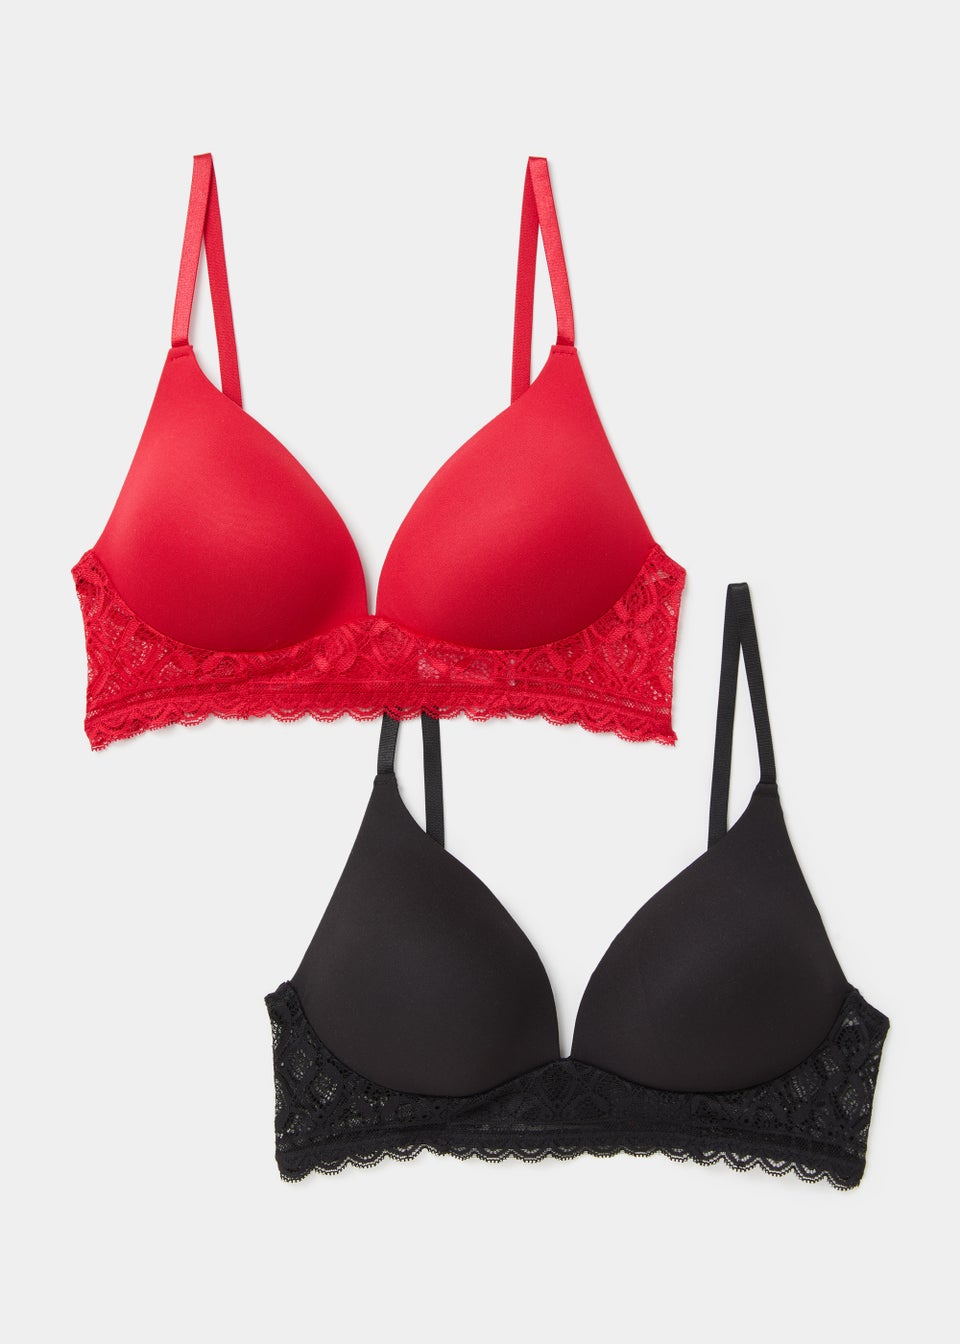 Lace Push-Up Bras - Red & Black - 2 Pack